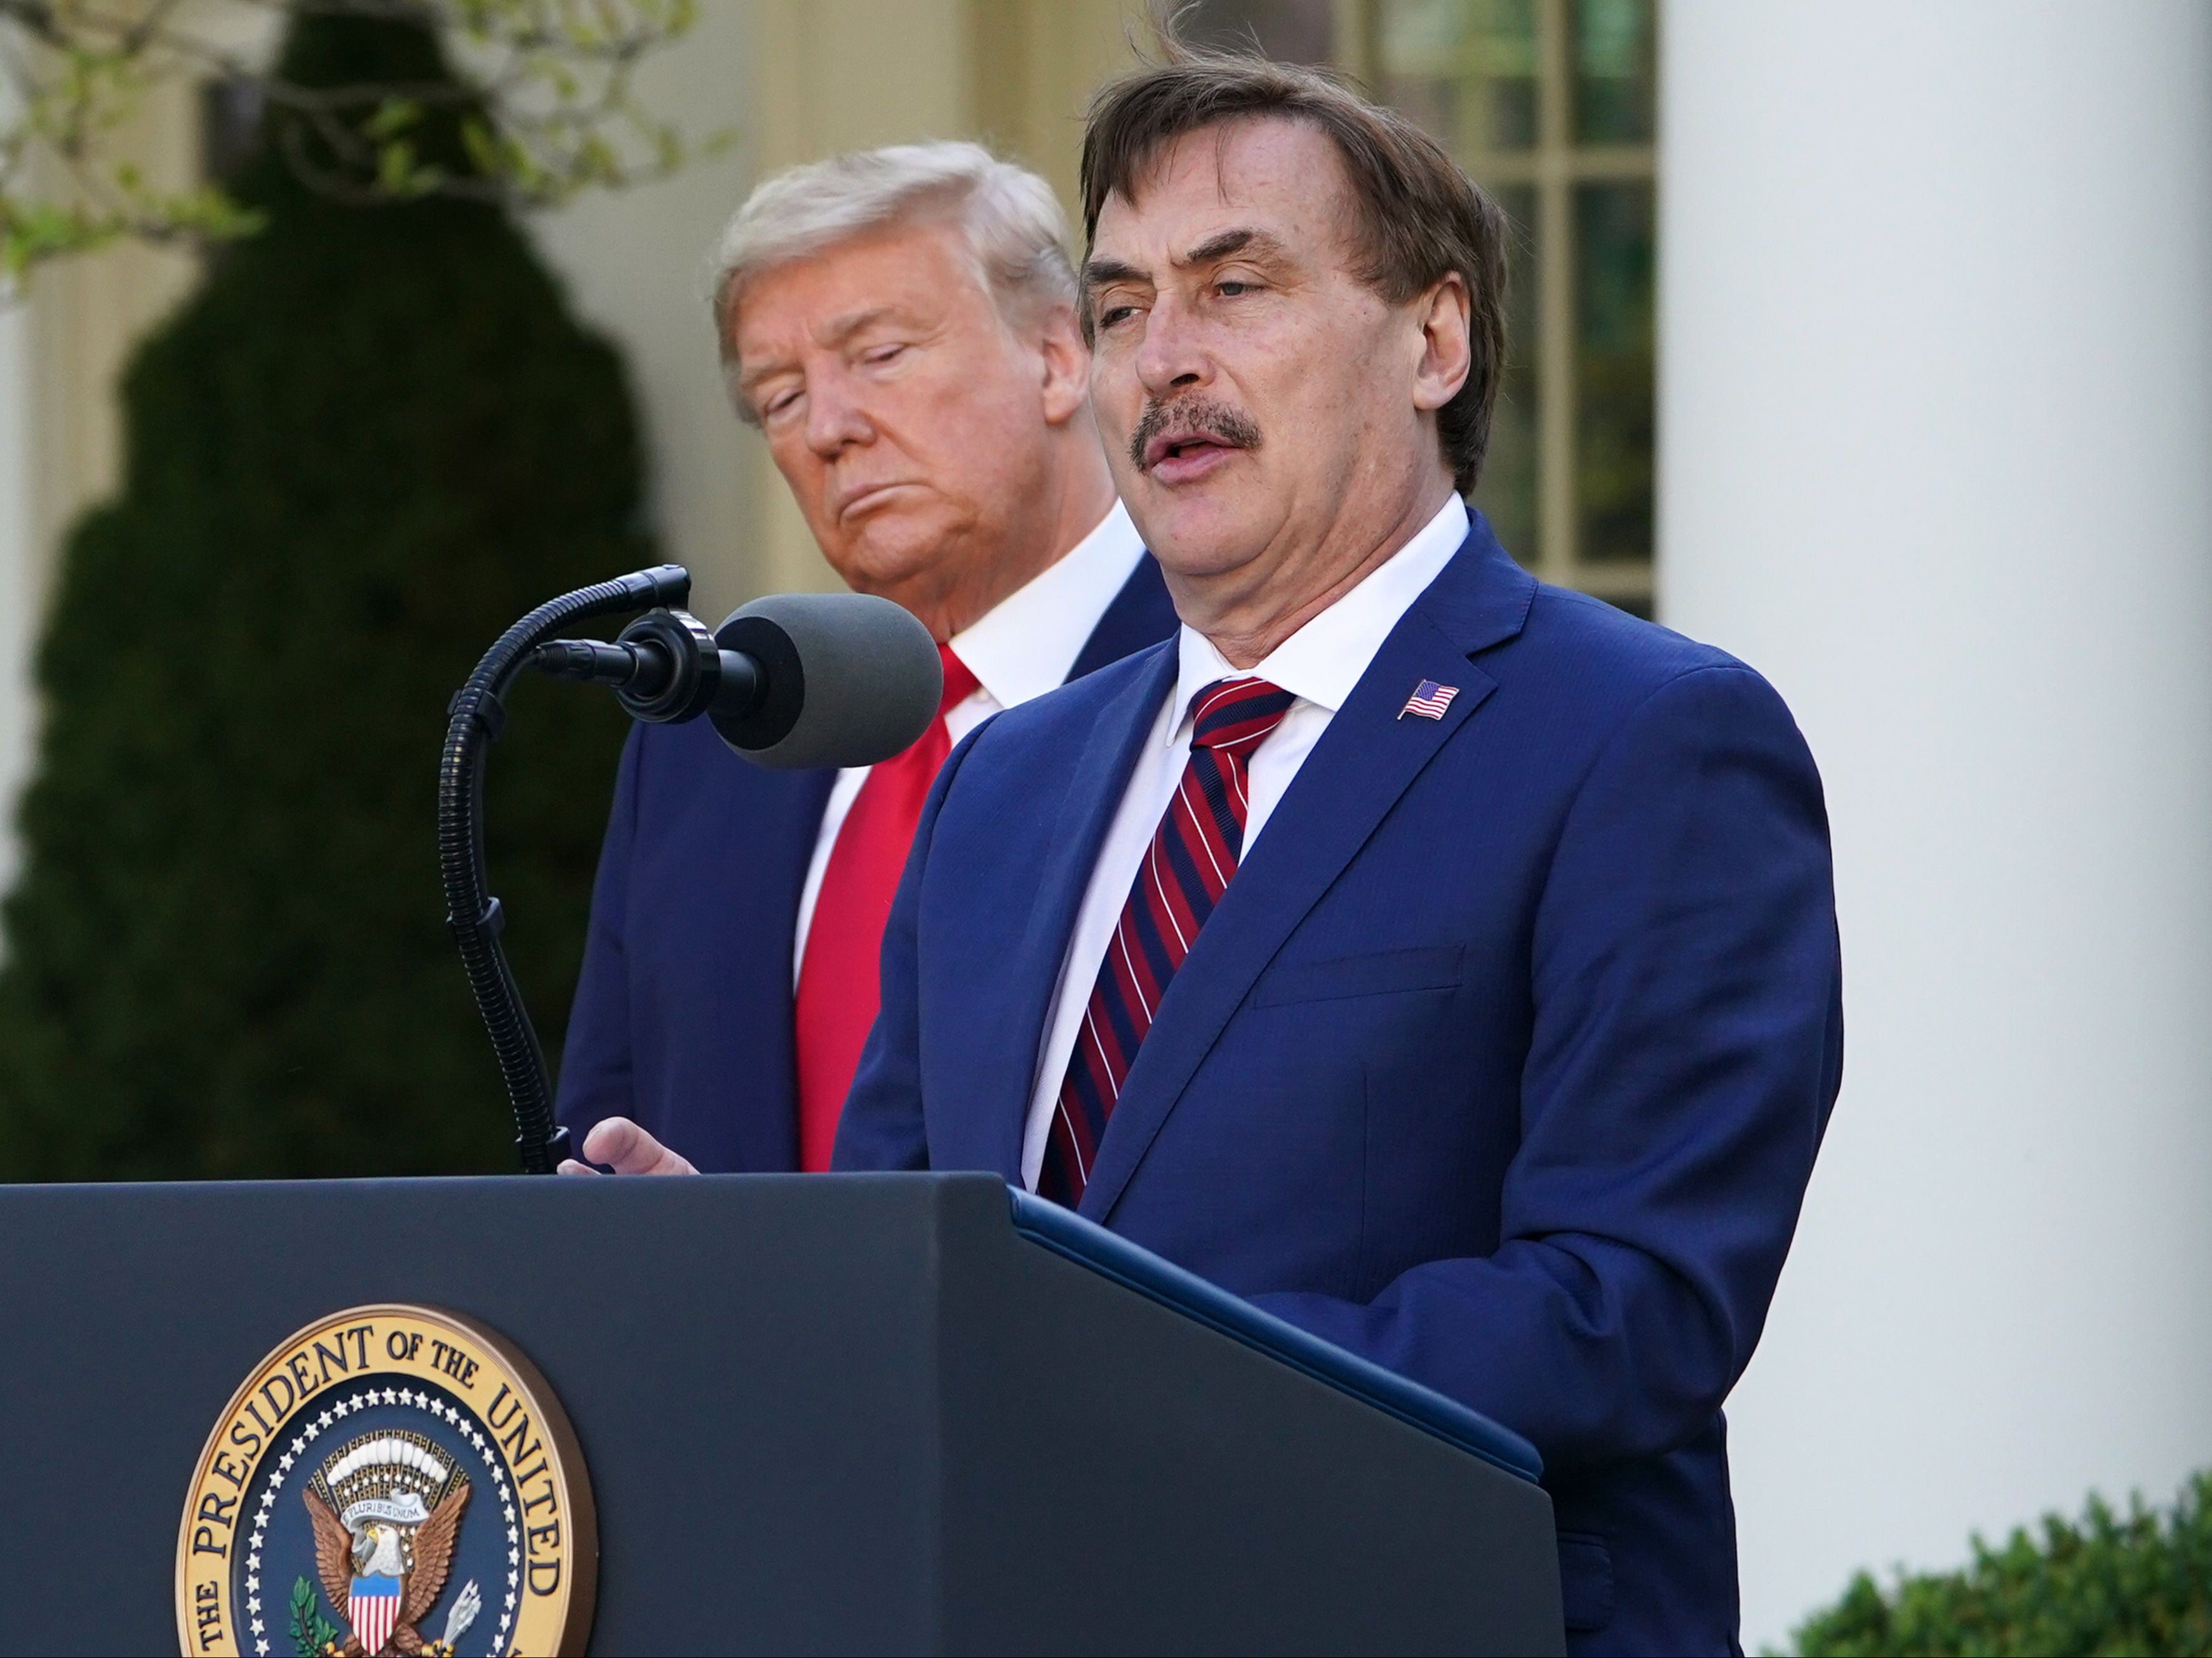 MyPillow CEO Mike Lindell appears with Donald Trump at the White House.